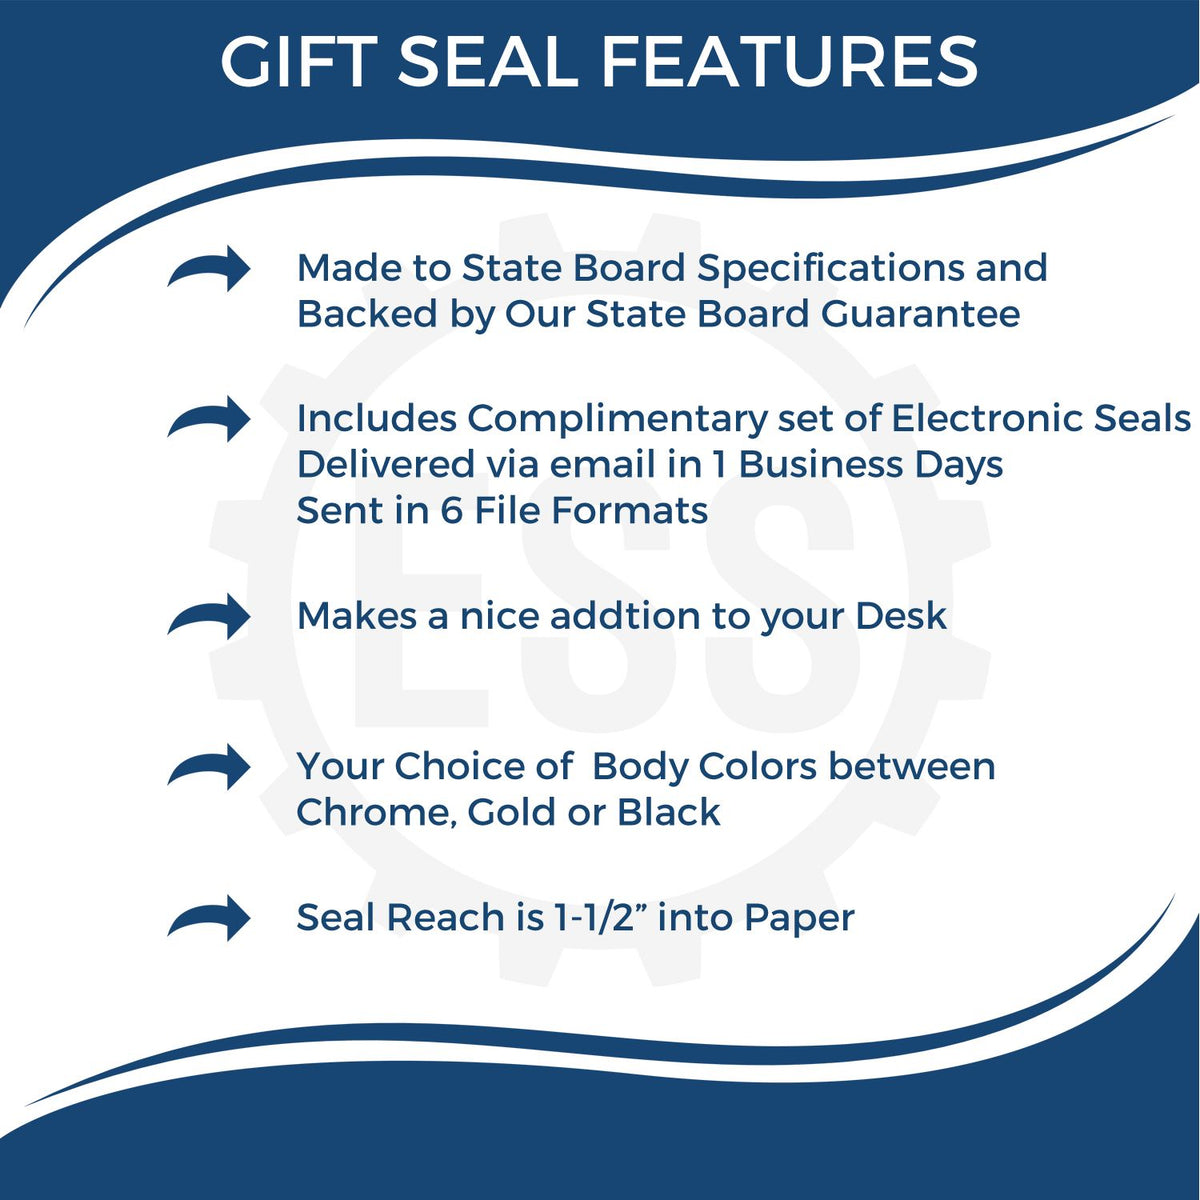 A picture of an infographic highlighting the selling points for the Gift Delaware Land Surveyor Seal